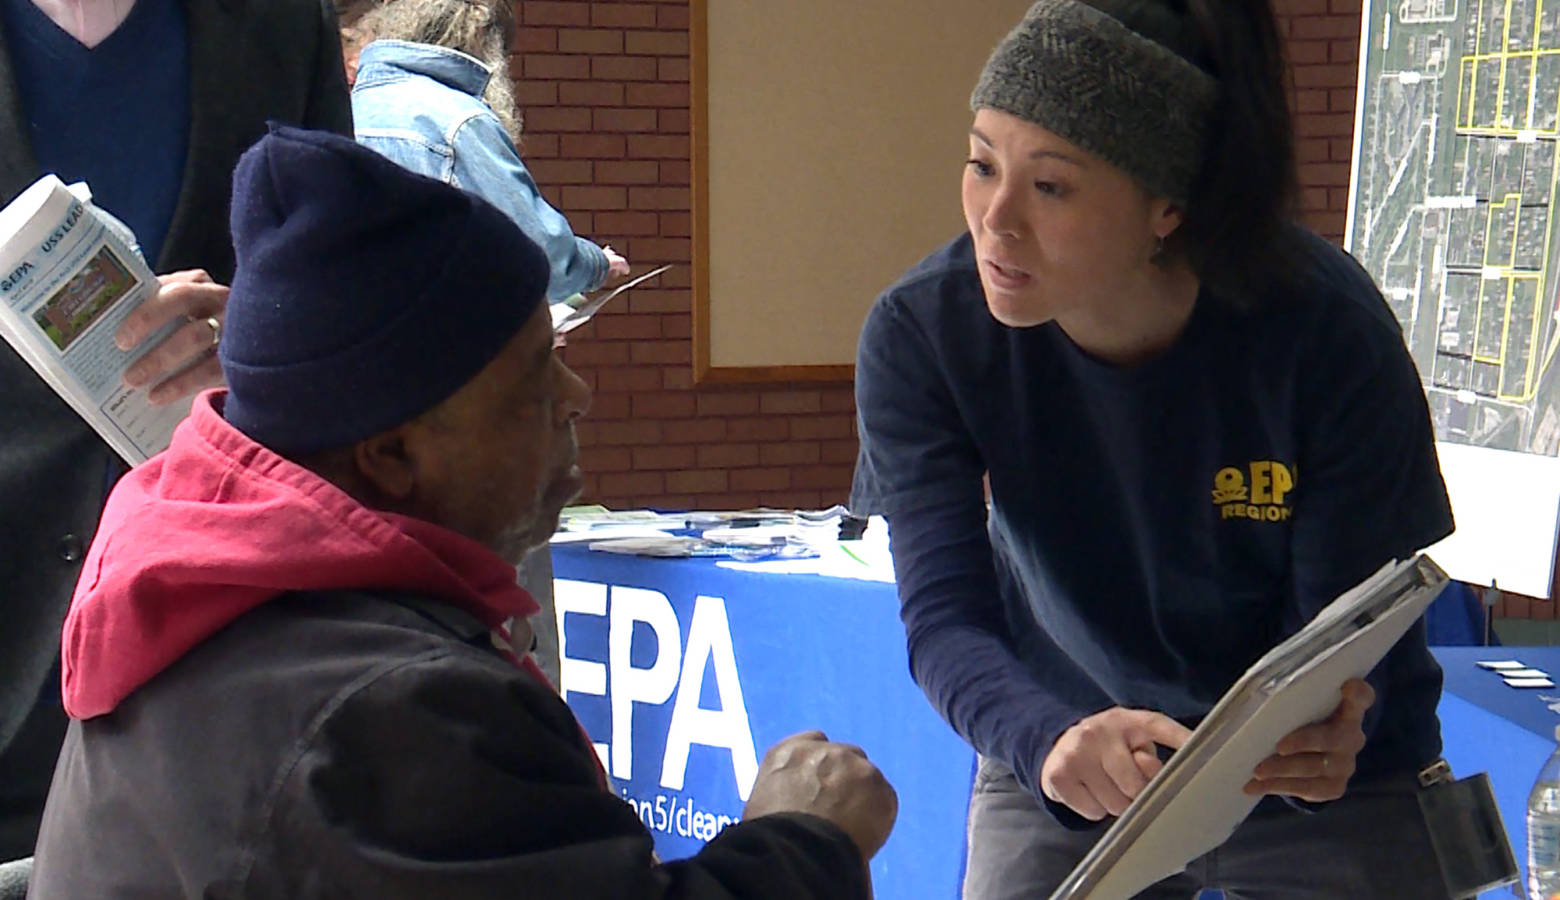 EPA remedial project manager Katherine Thomas talks with a Superfund resident about the groundwater investigation. (Lauren Chapman/IPB News)